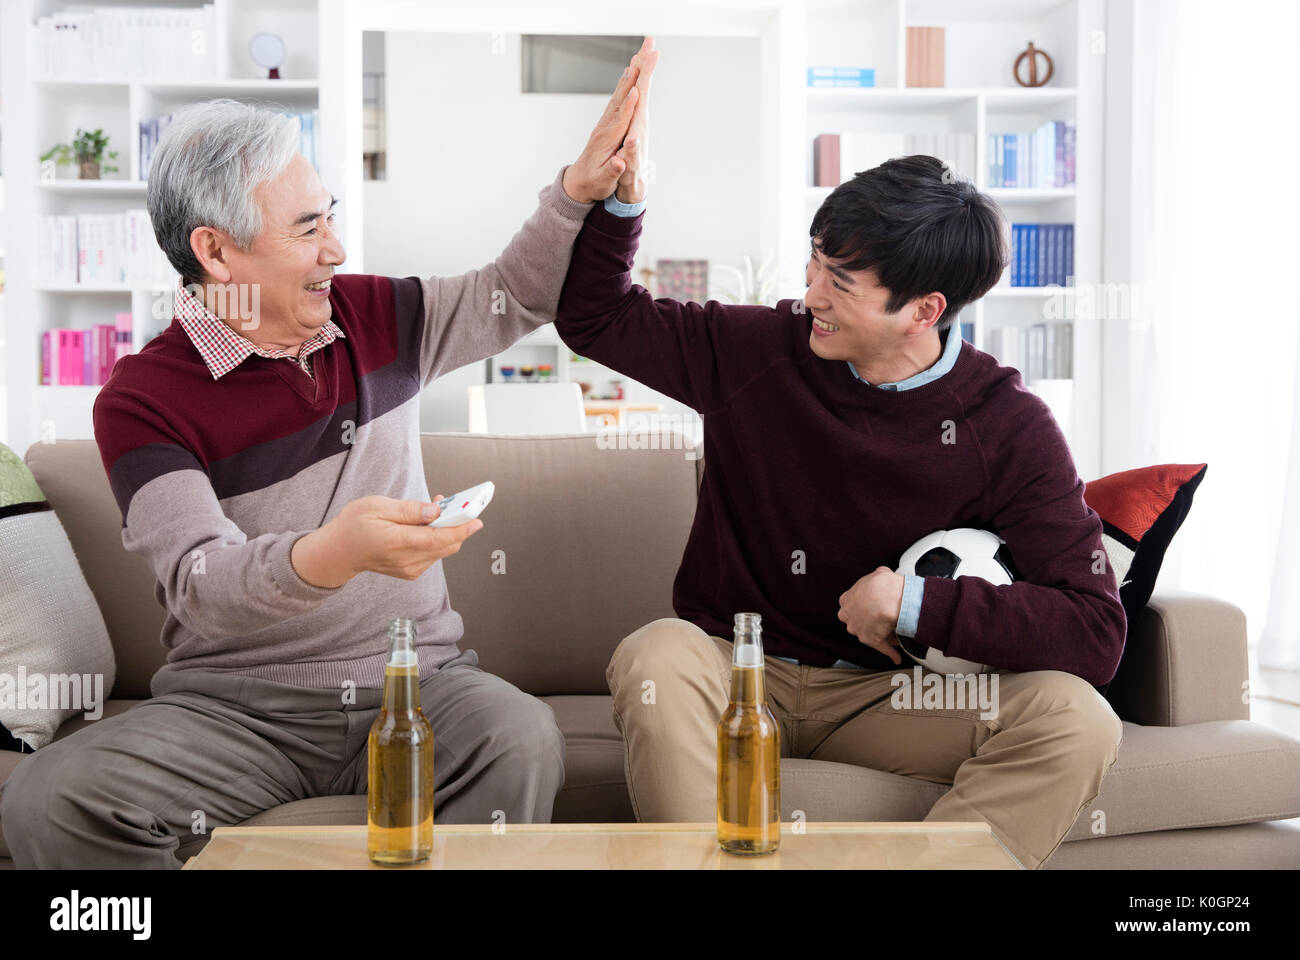 Smiling senior man and his young son slapping high five Stock Photo